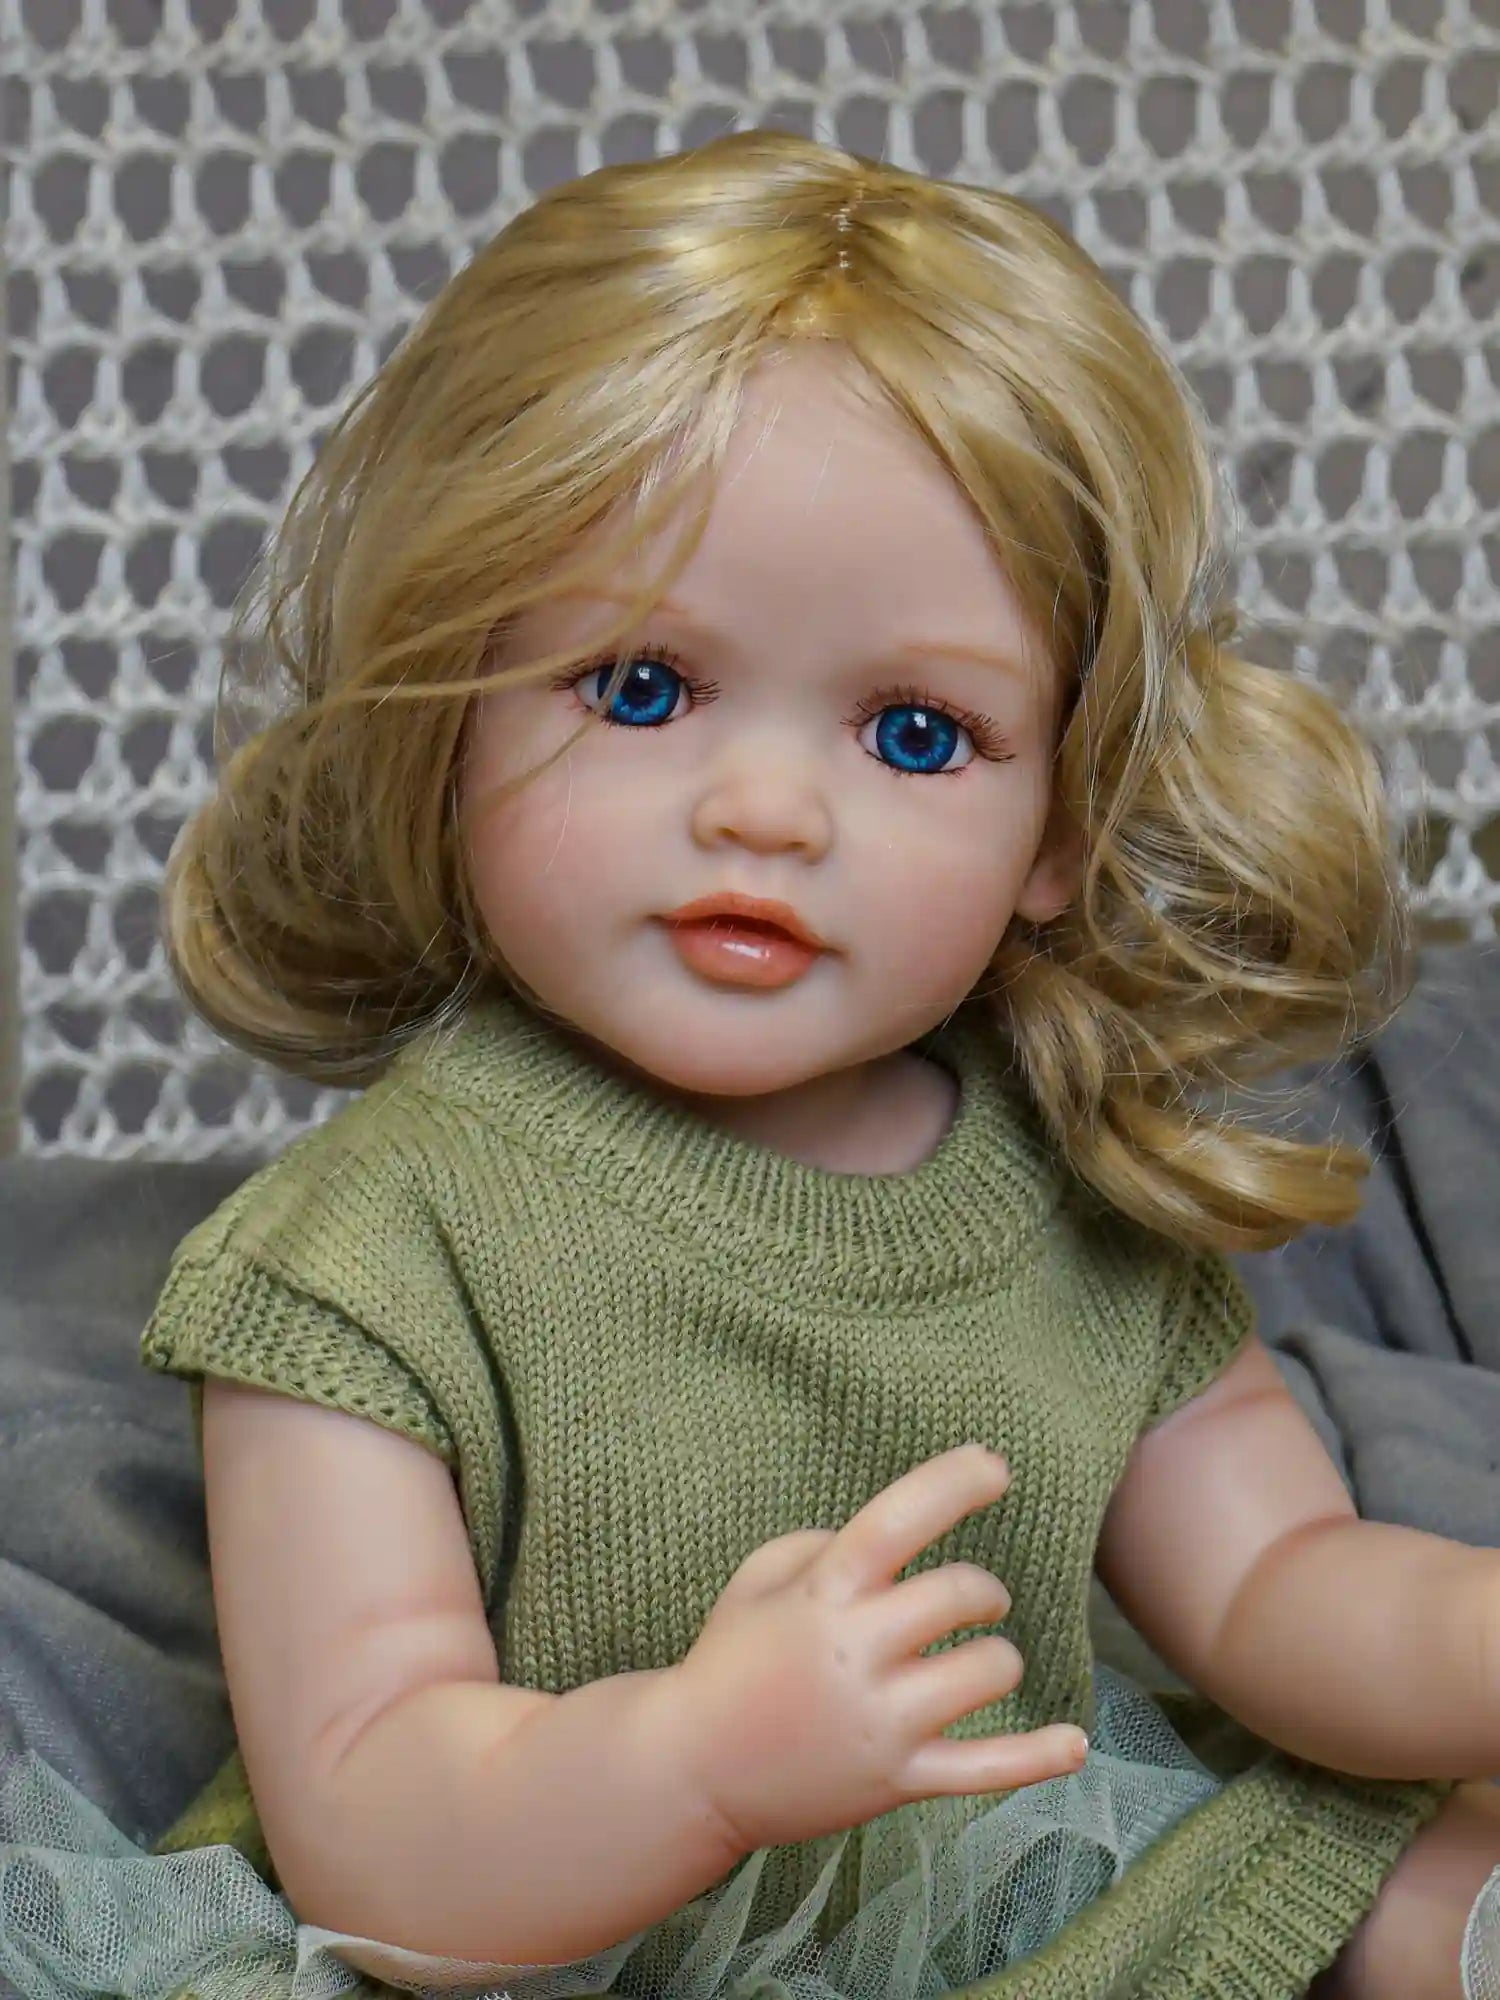 Our exquisite reborn doll with her realistic features and sun-kissed hair, clothed in an earthy green dress, is a portrait of doll perfection.